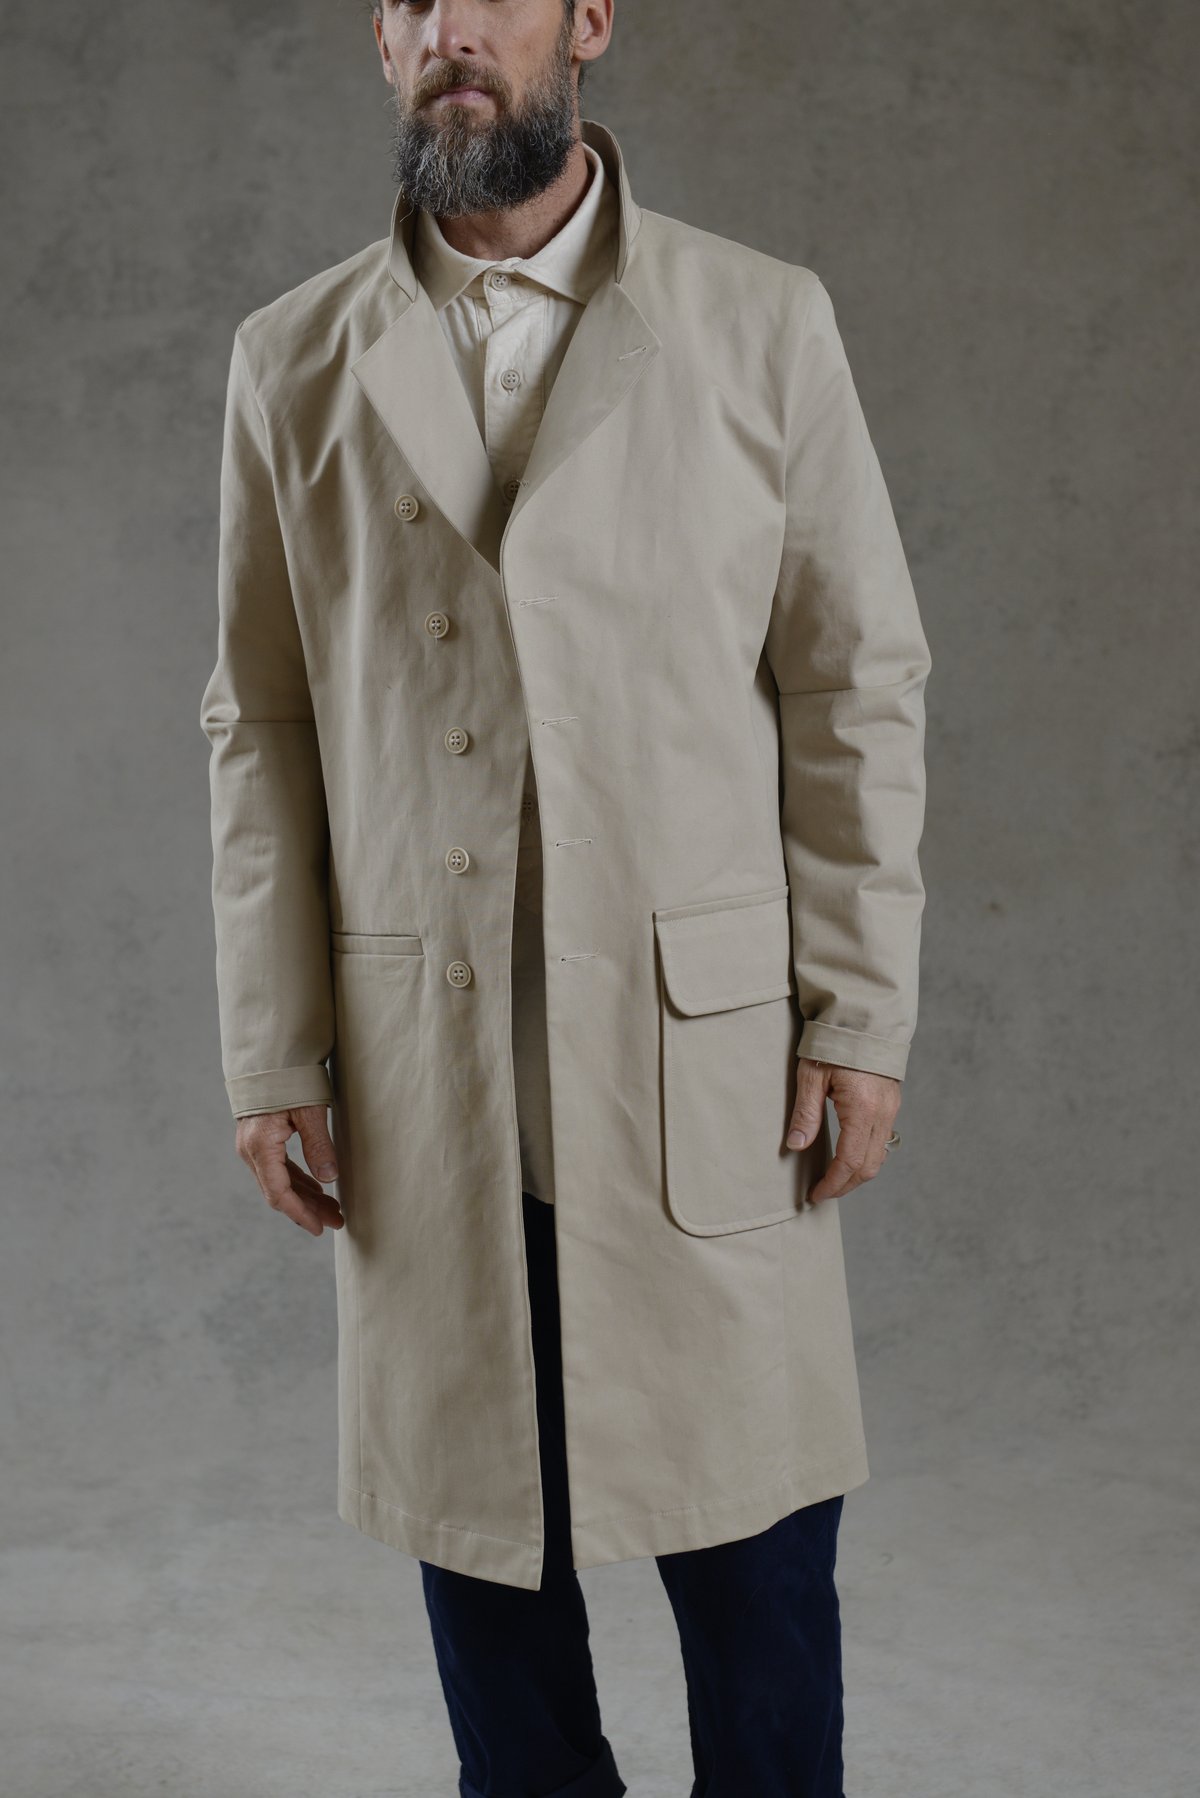 EAST END UNLINED COAT in Tennyson cotton STONE £390.00 | Workhouse England